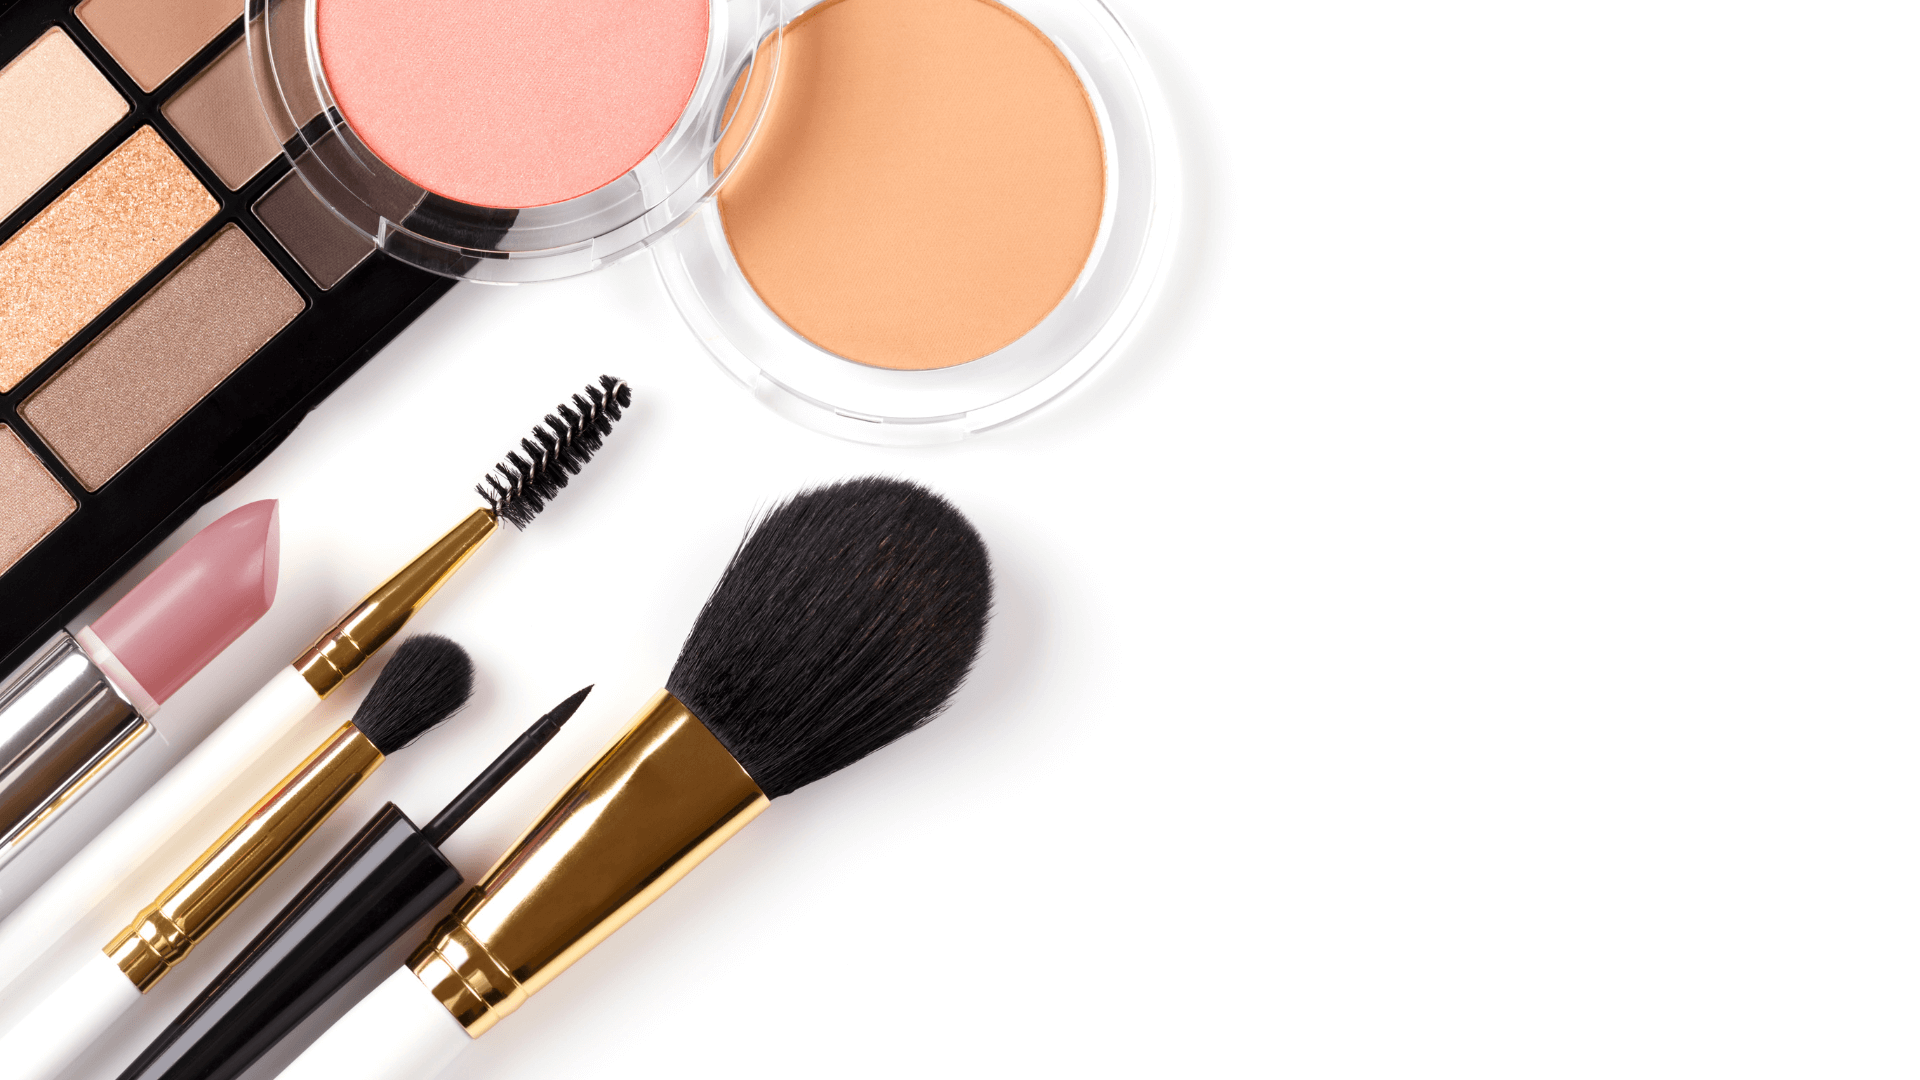 Fulfillment for Cosmetics and Beauty Products